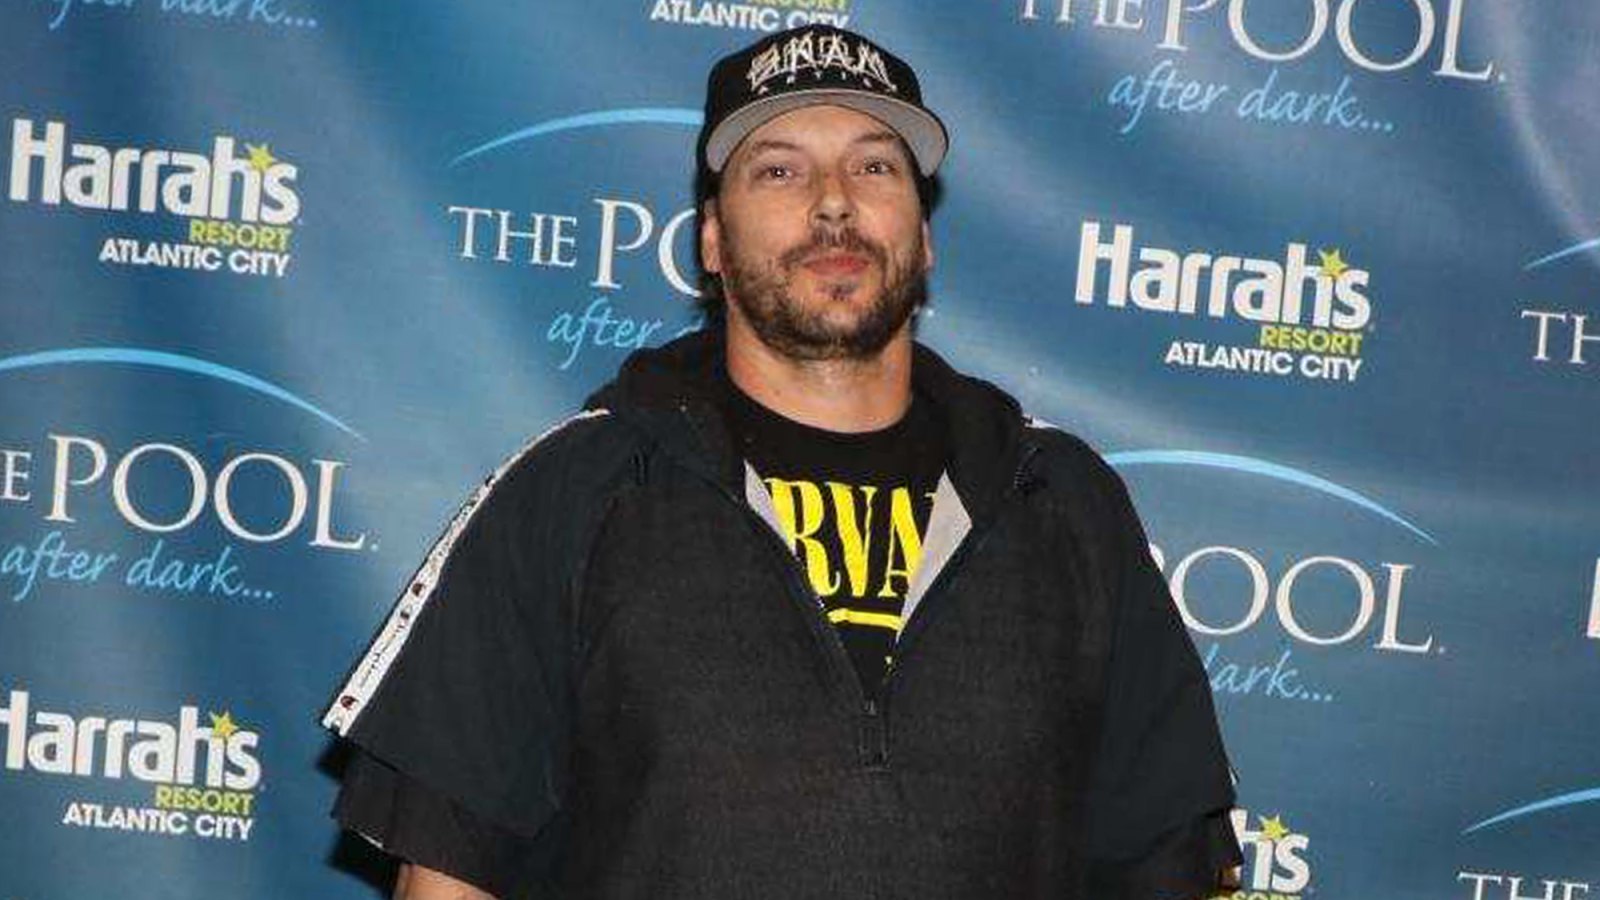 Kevin Federline Says Watching His 'Awesome' Kids Grow Up Keeps Him Busy: 'I Got My Hands Full'